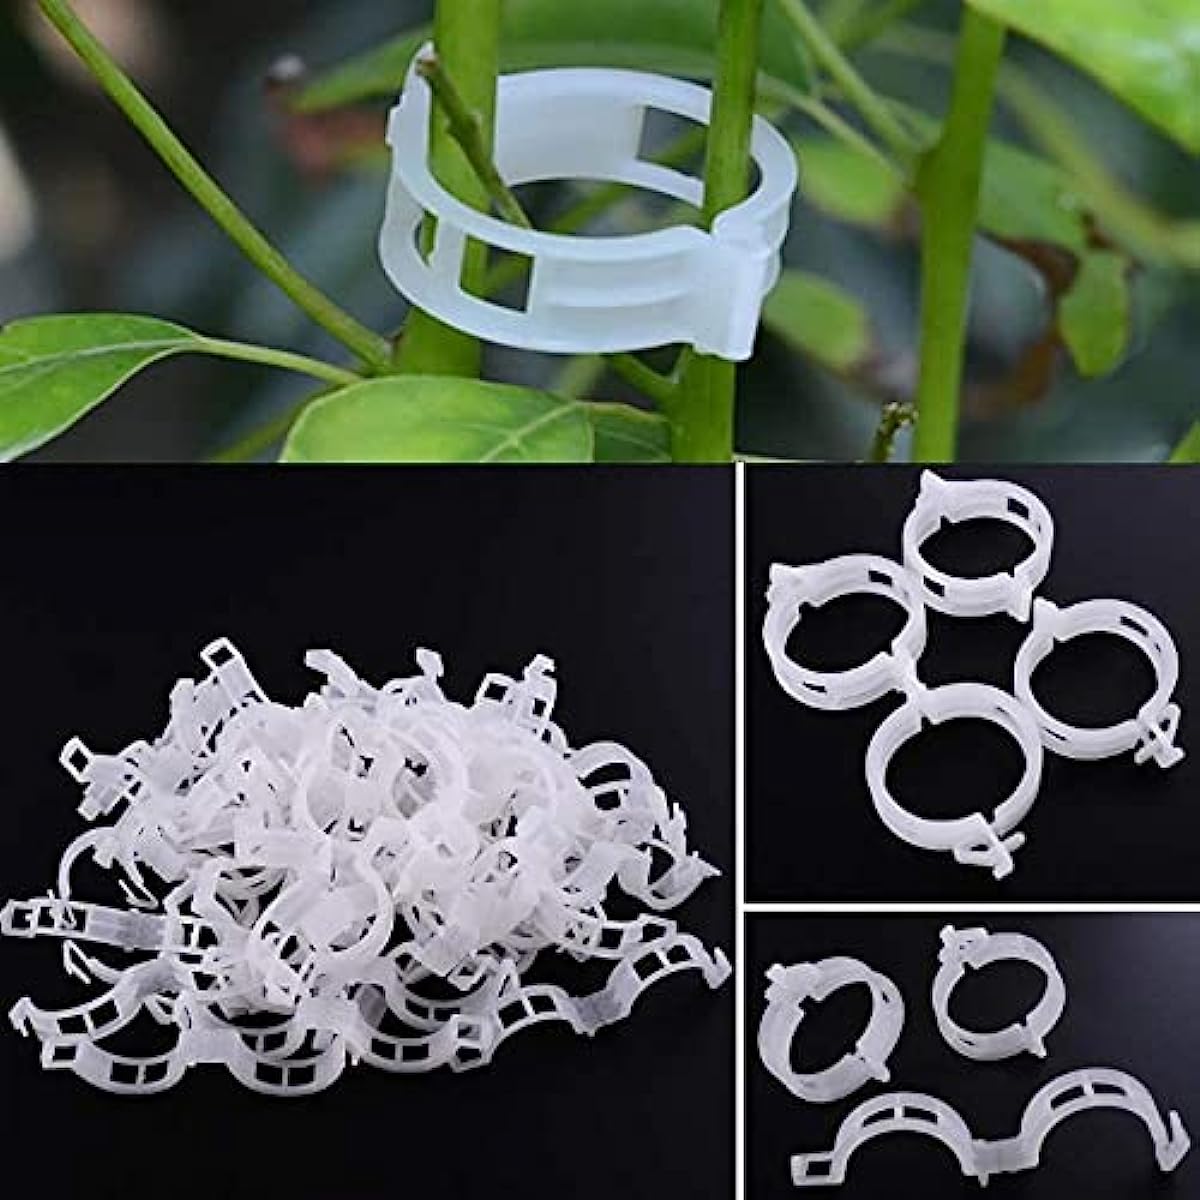 100pcs plant support garden clips tomato clips supports connects plants twine vines trellis cages plant vine vegetable fastening clip grafting tools make plant grow upright and healthier